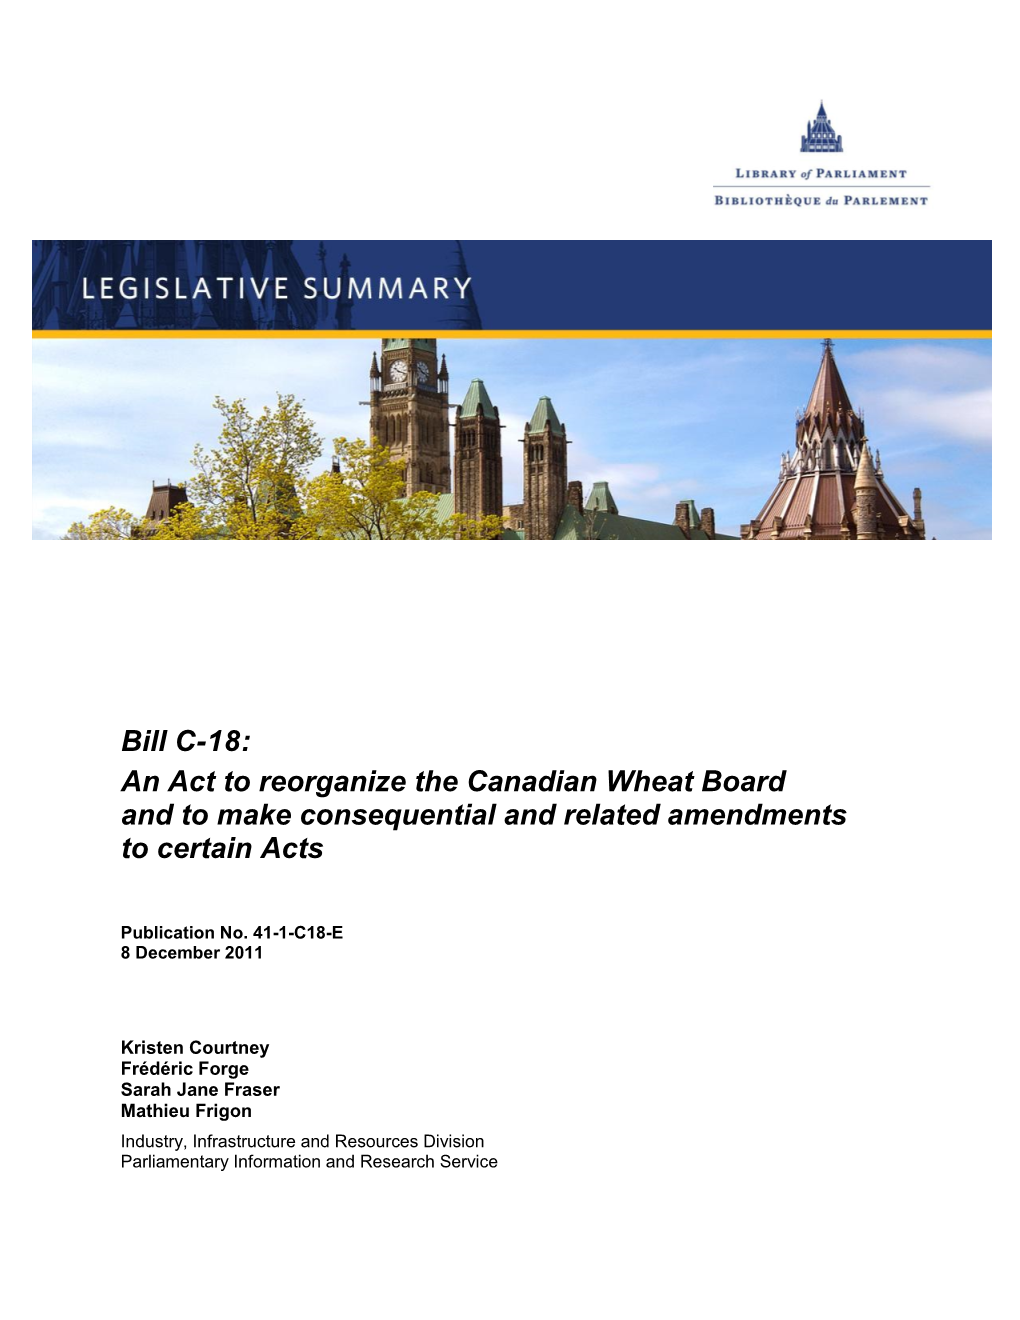 An Act to Reorganize the Canadian Wheat Board and to Make Consequential and Related Amendments to Certain Acts